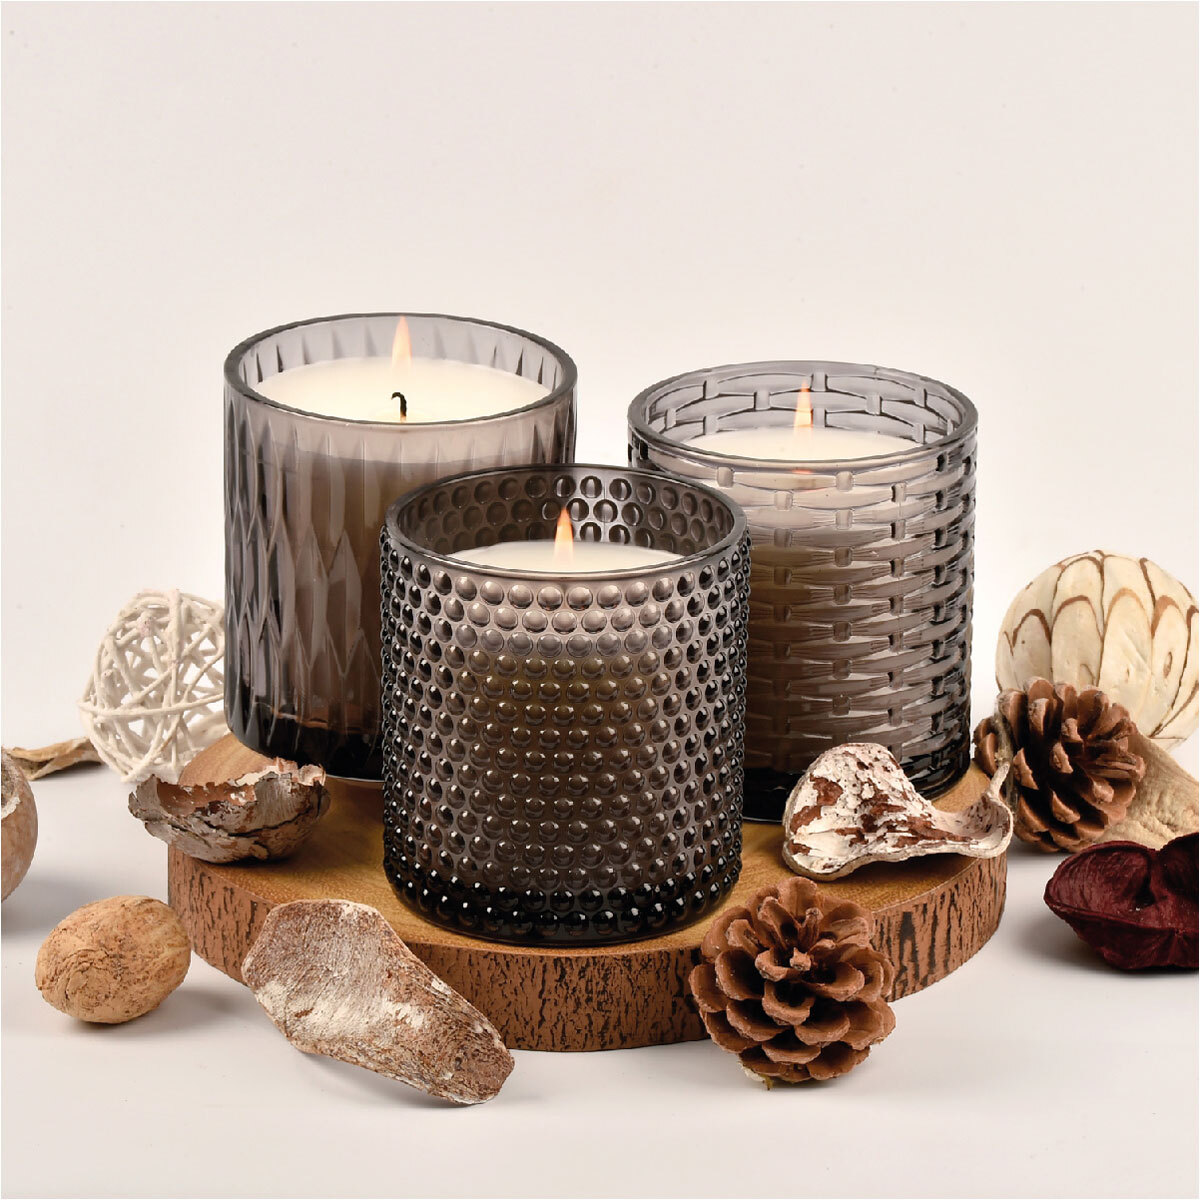 Torc Fragranced Textured Smoked Glass Candles, 3 Pack